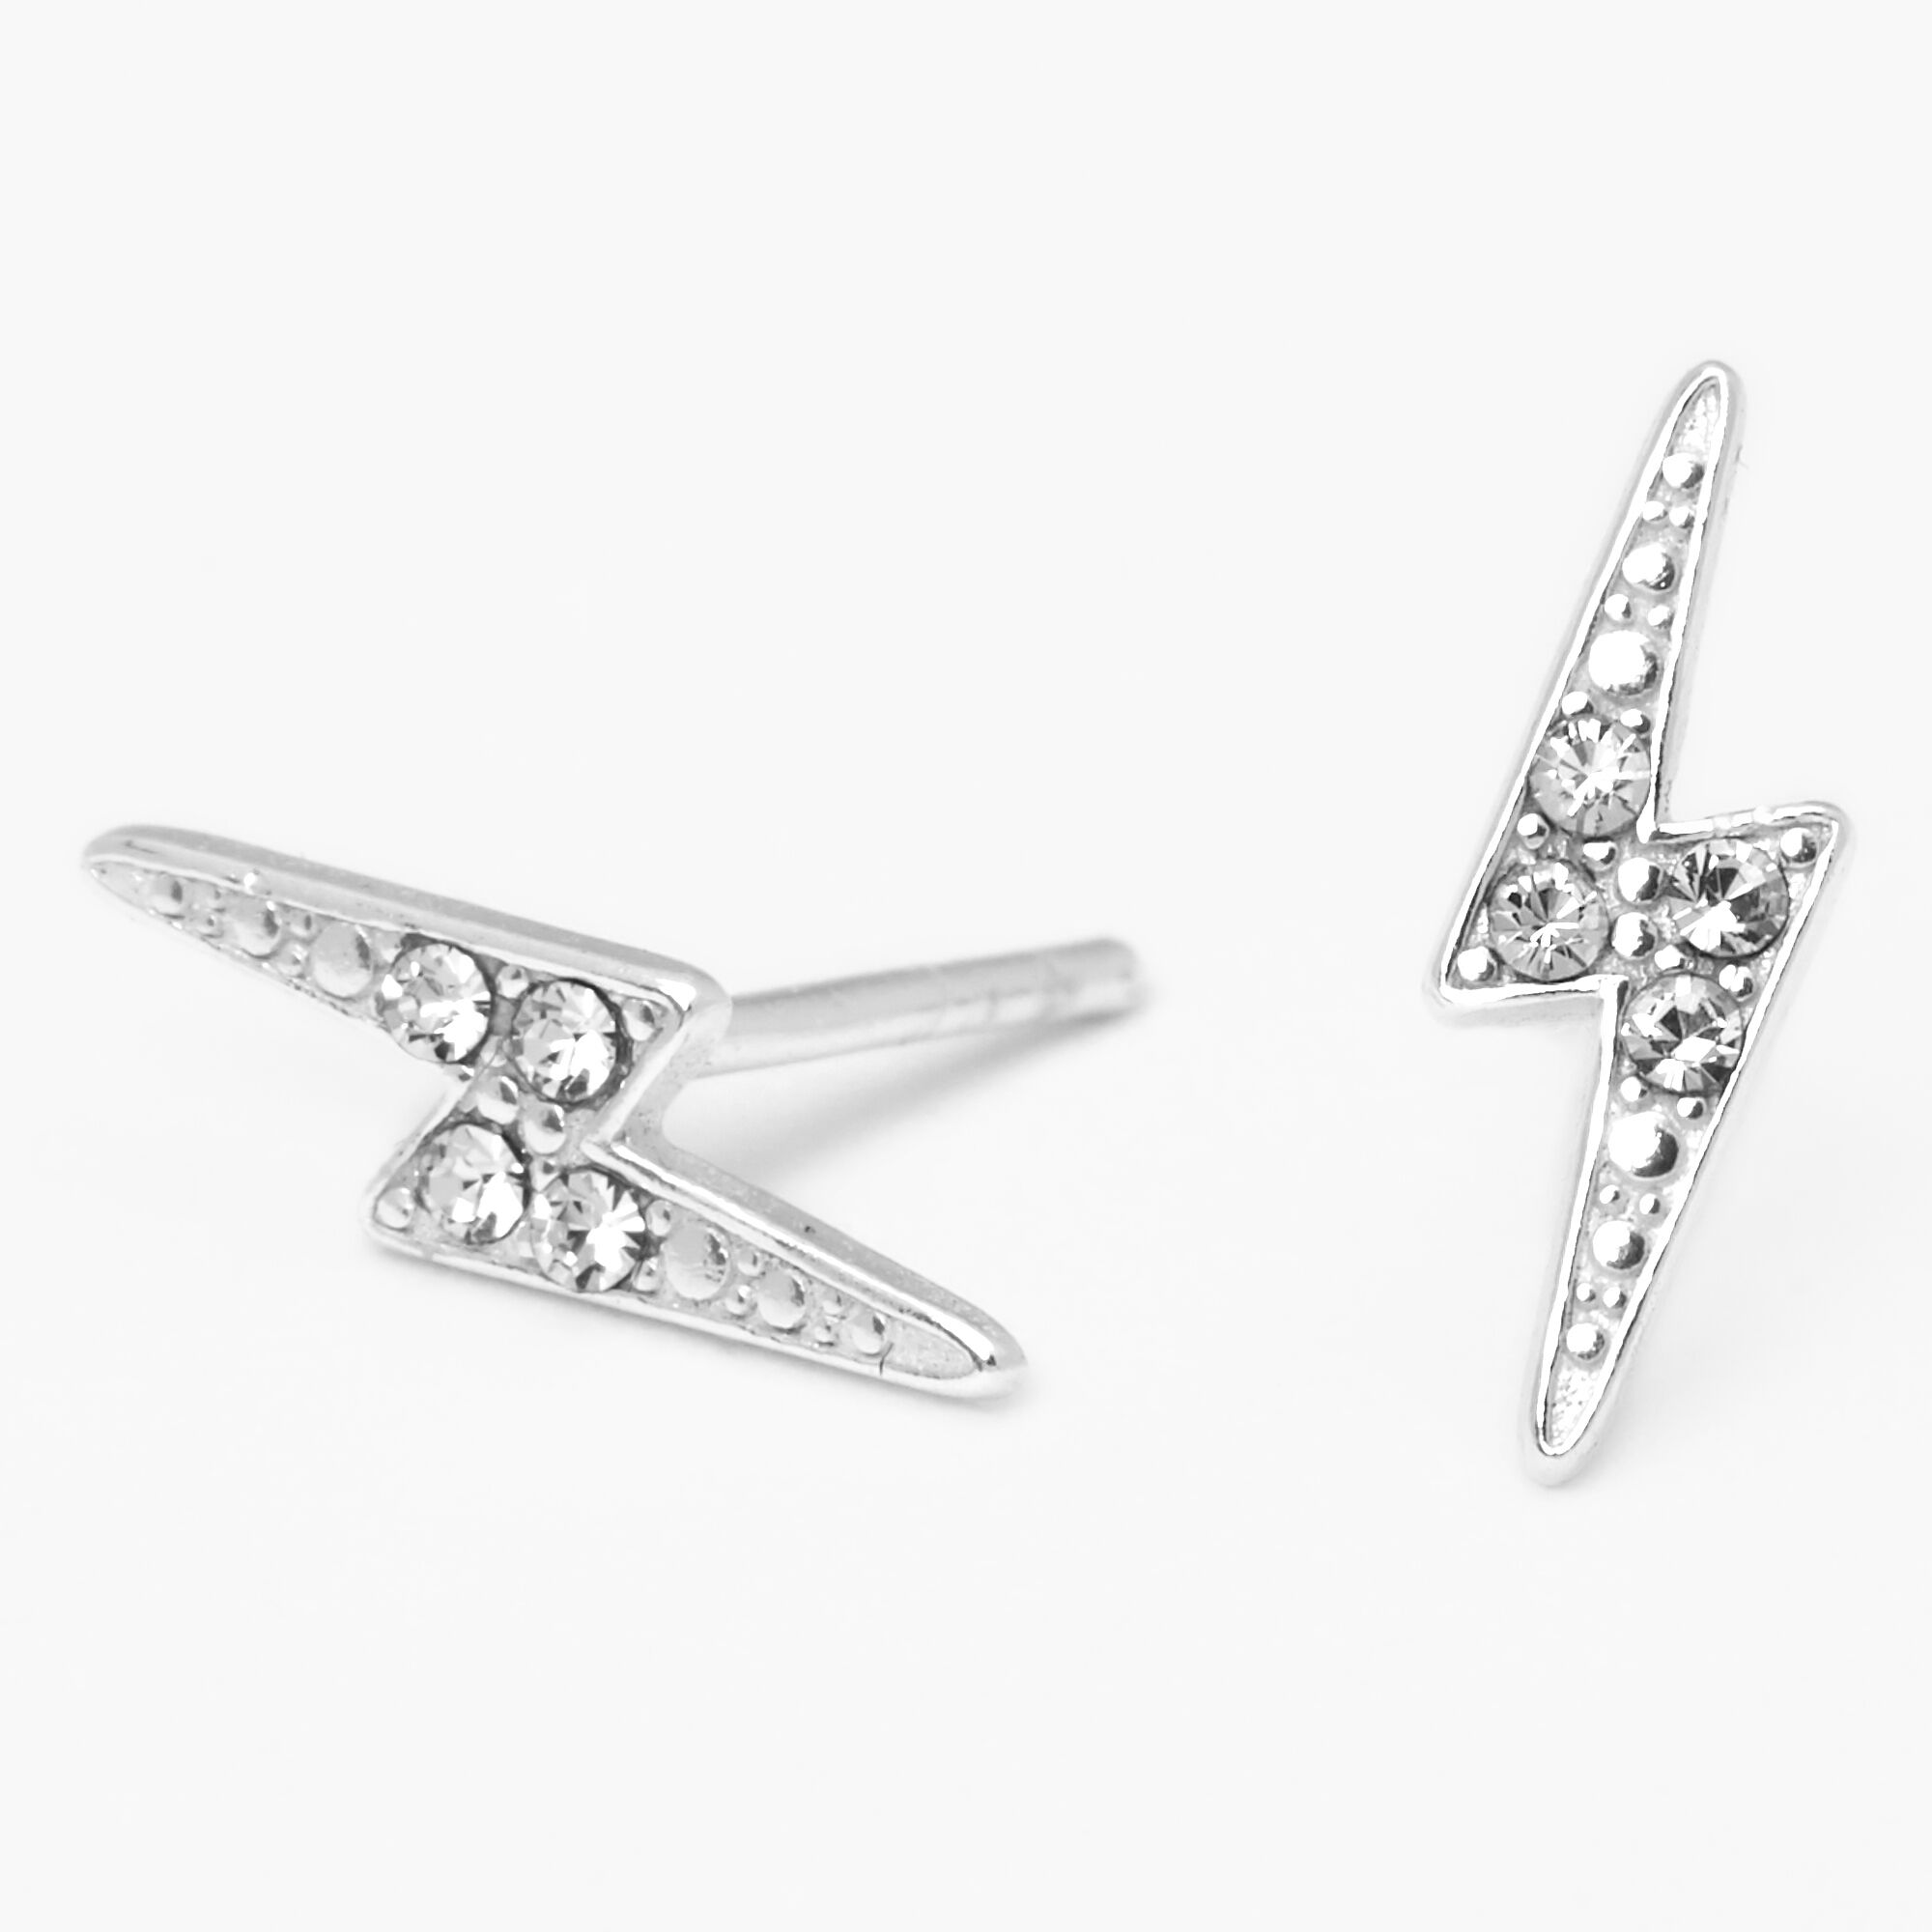 View Claires Crystal Lightning Bolt Stud Earrings Silver information